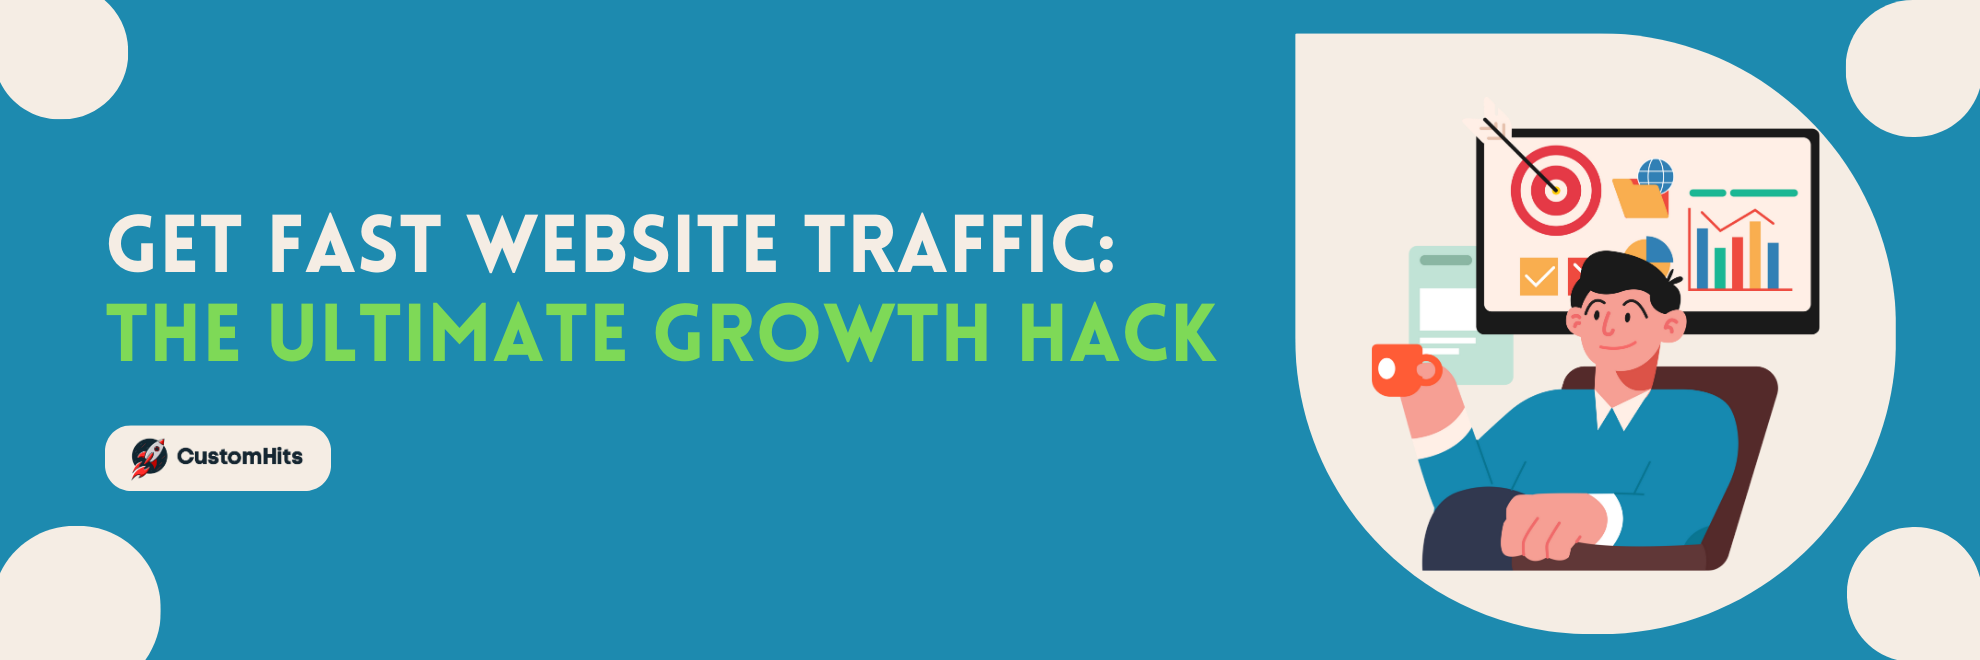 Get Fast Website Traffic: The Ultimate Growth Hack